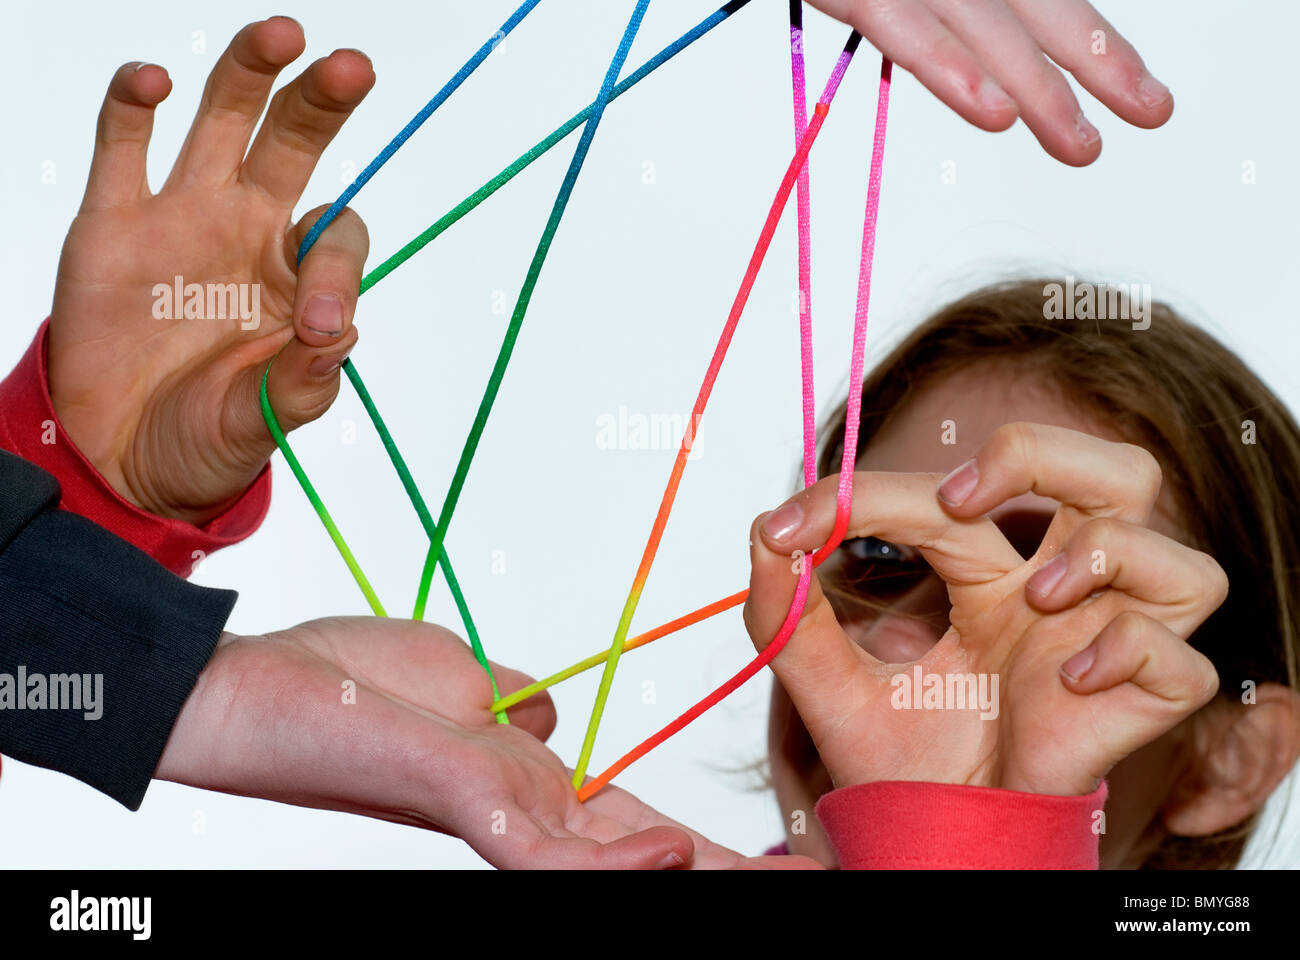 Hands of 2 girls playing fingertwist with a coulored rope. Stock Photo